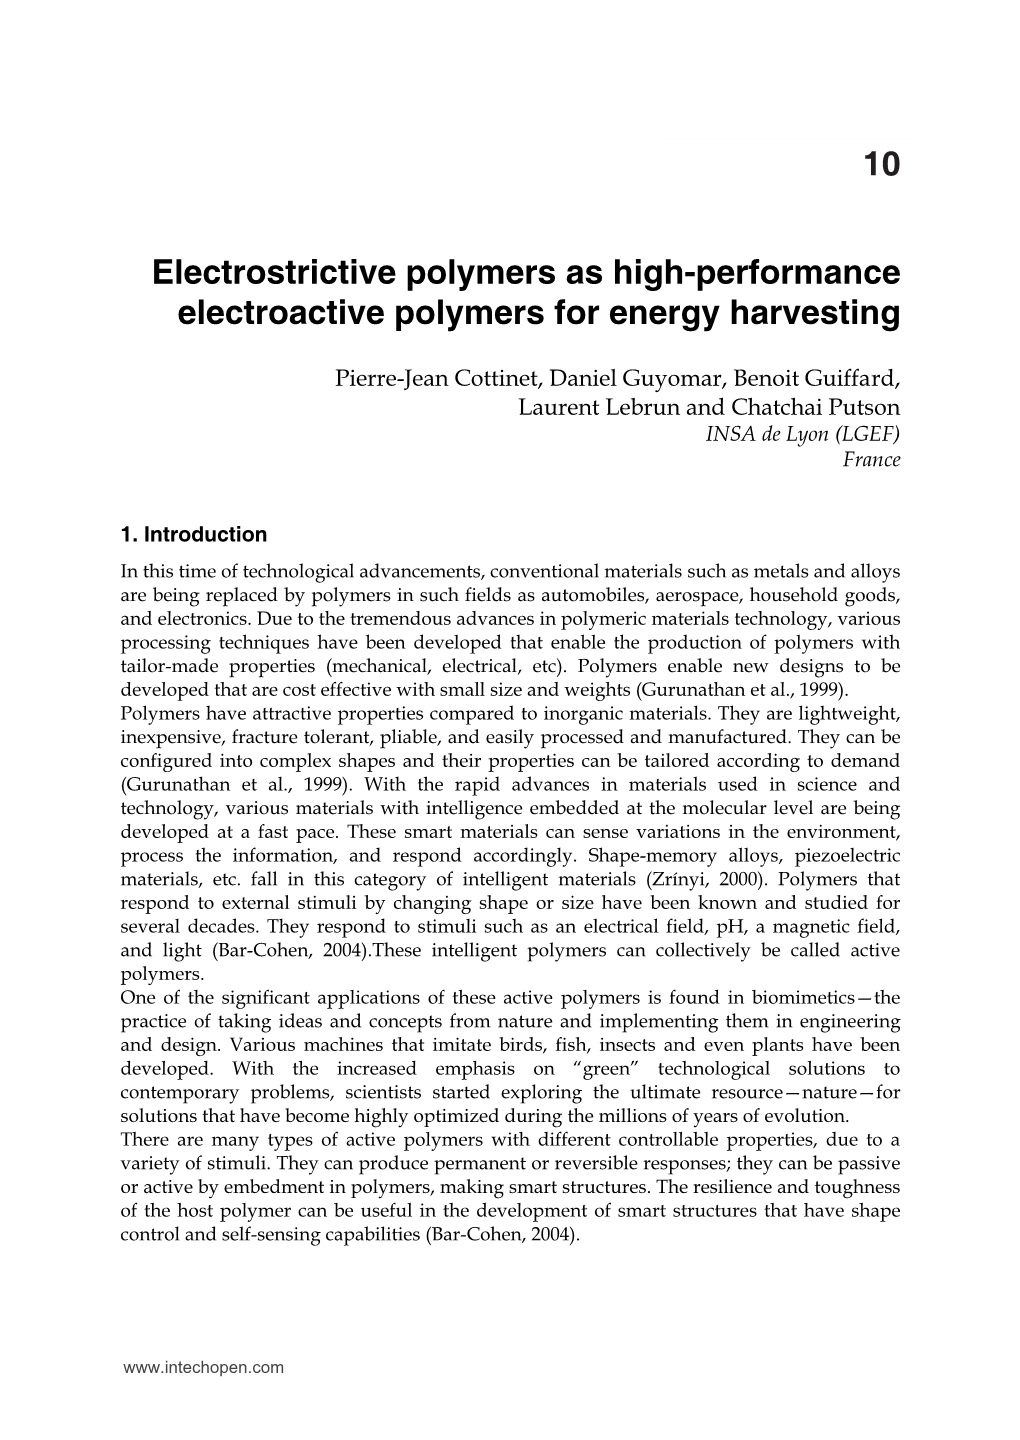 Electrostrictive Polymers As High-Performance Electroactive Polymers for Energy Harvesting 185